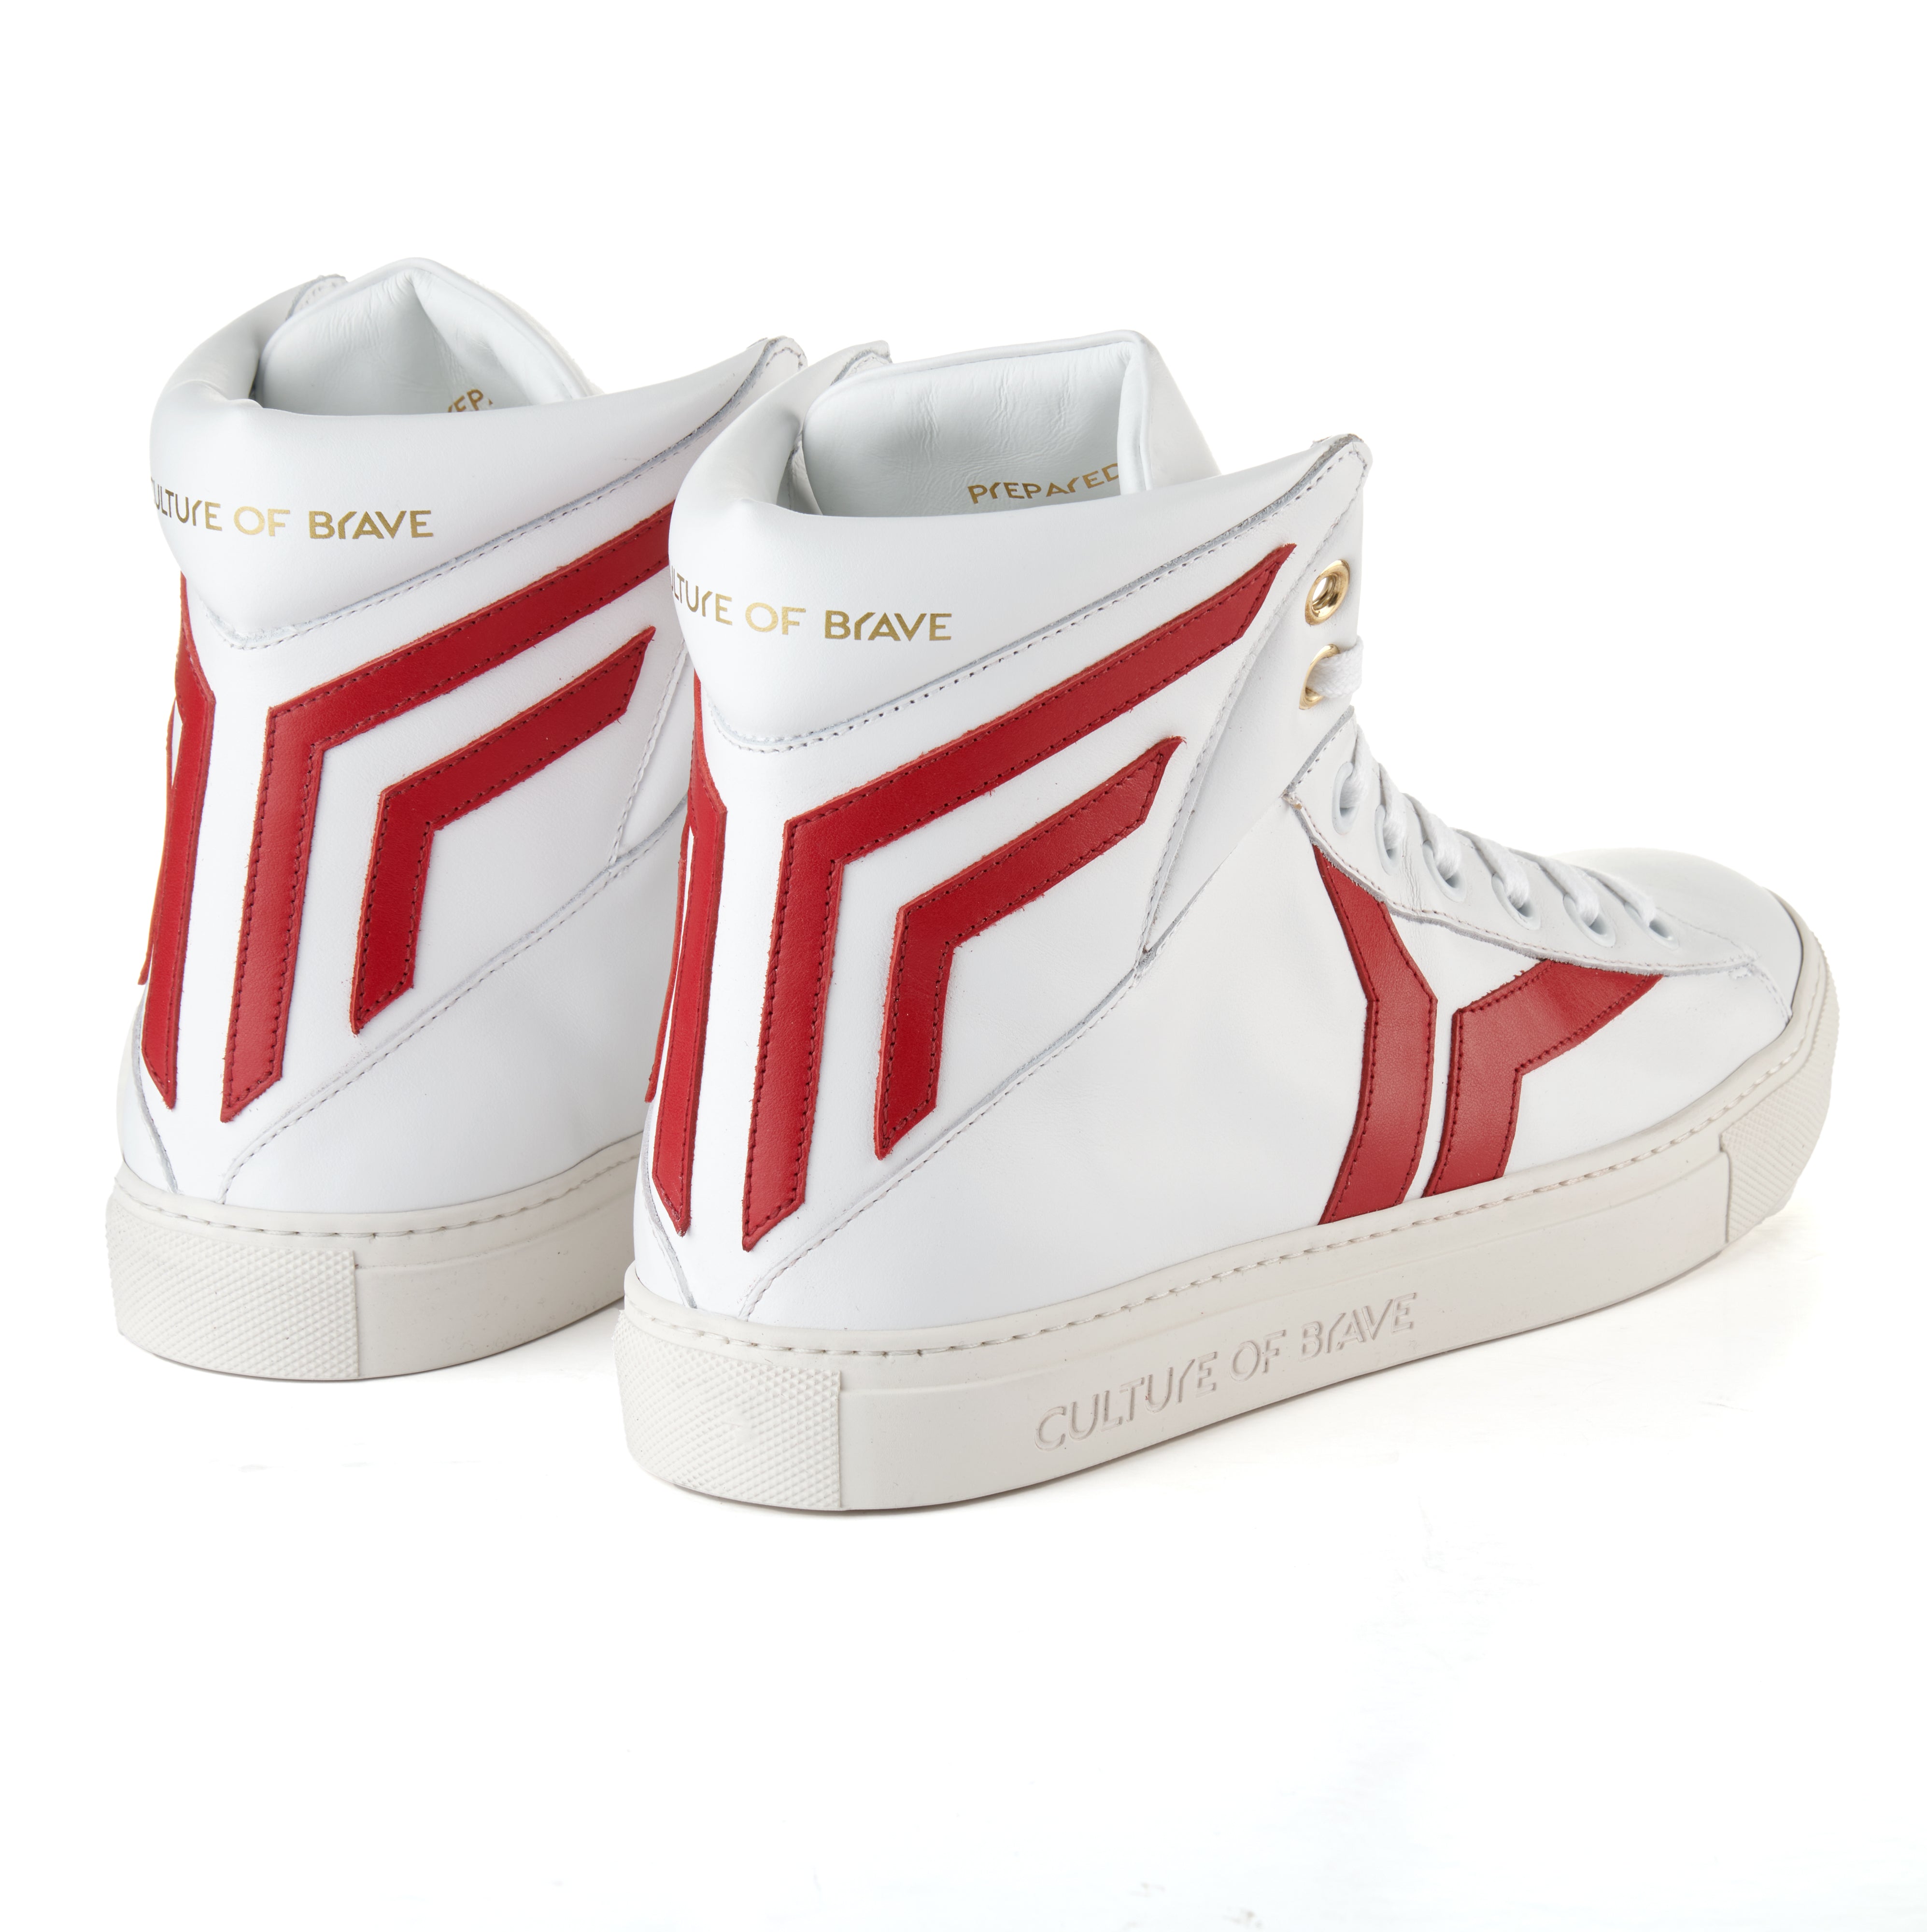 Prepared to Risk S23 Men White leather red wing high cut